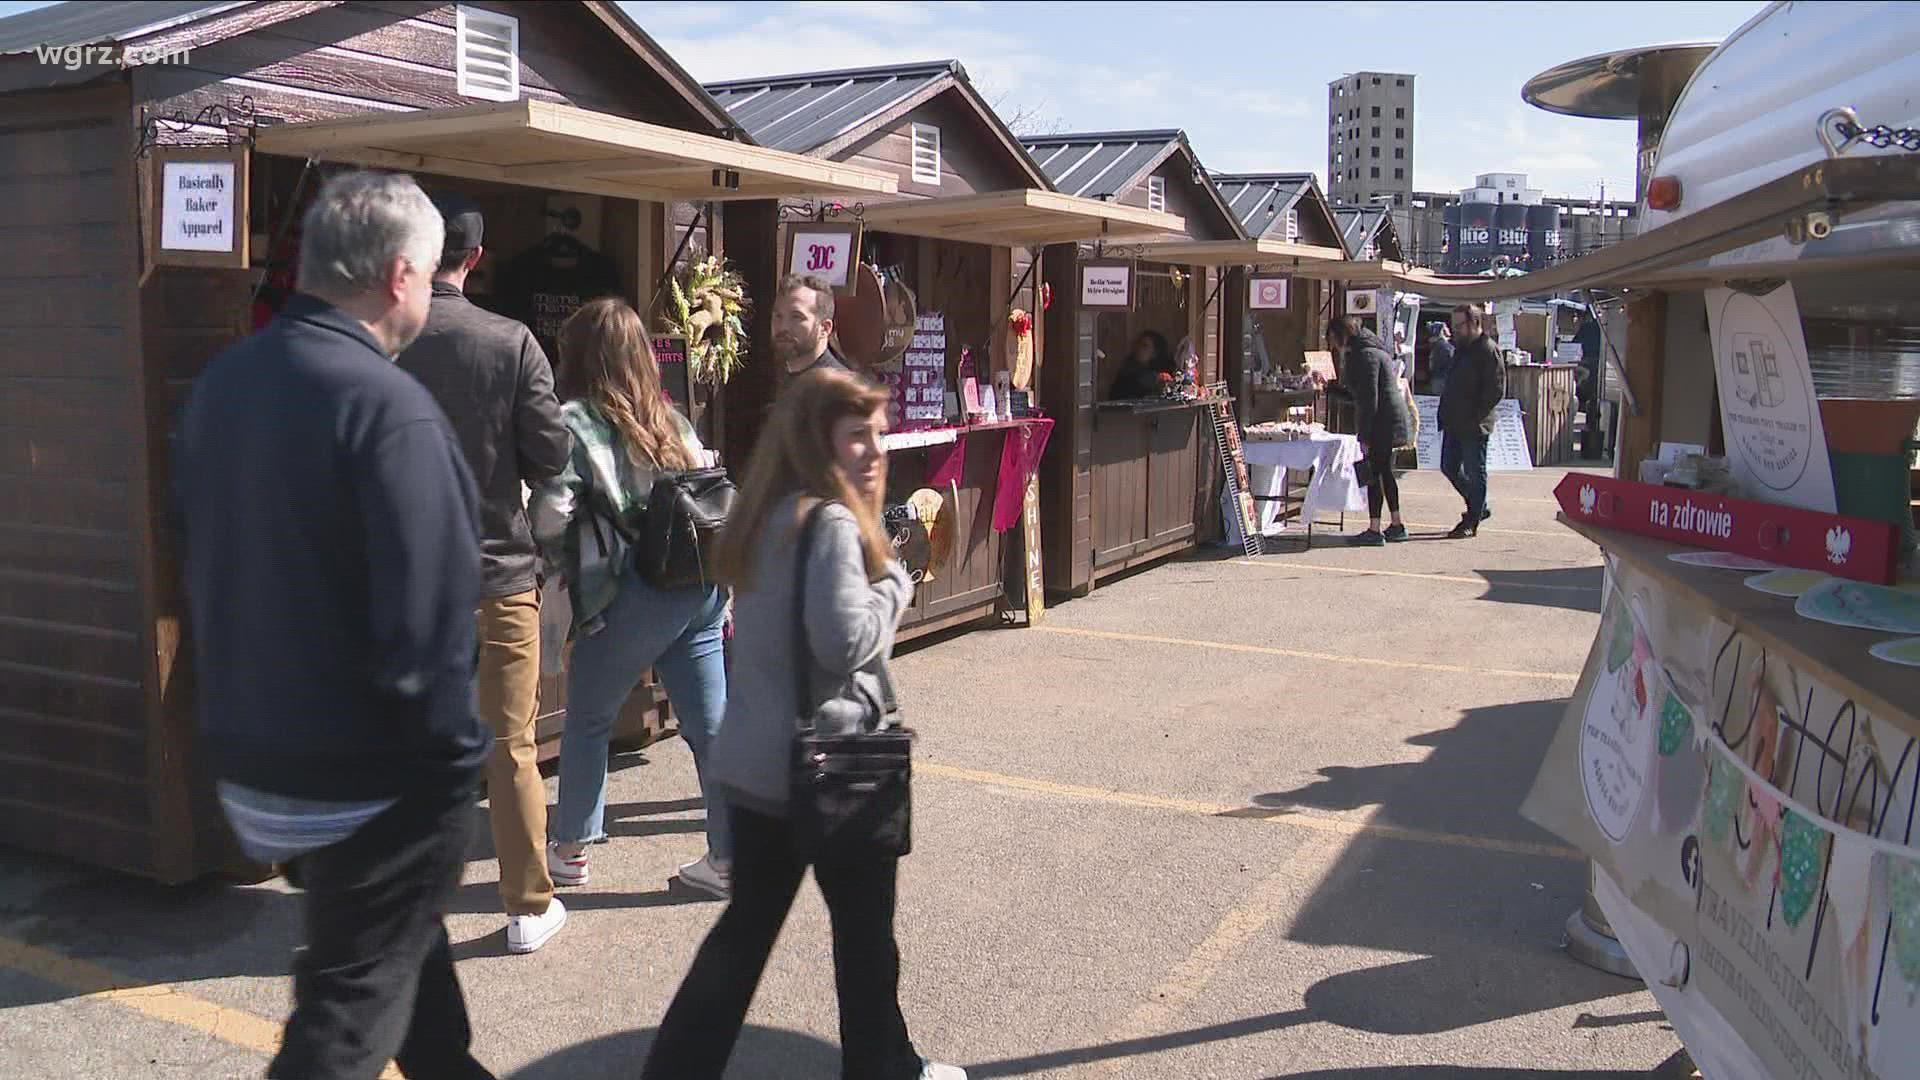 An artisan market in Buffalo welcomed hundreds of folks today to browse around 30 different vendors!